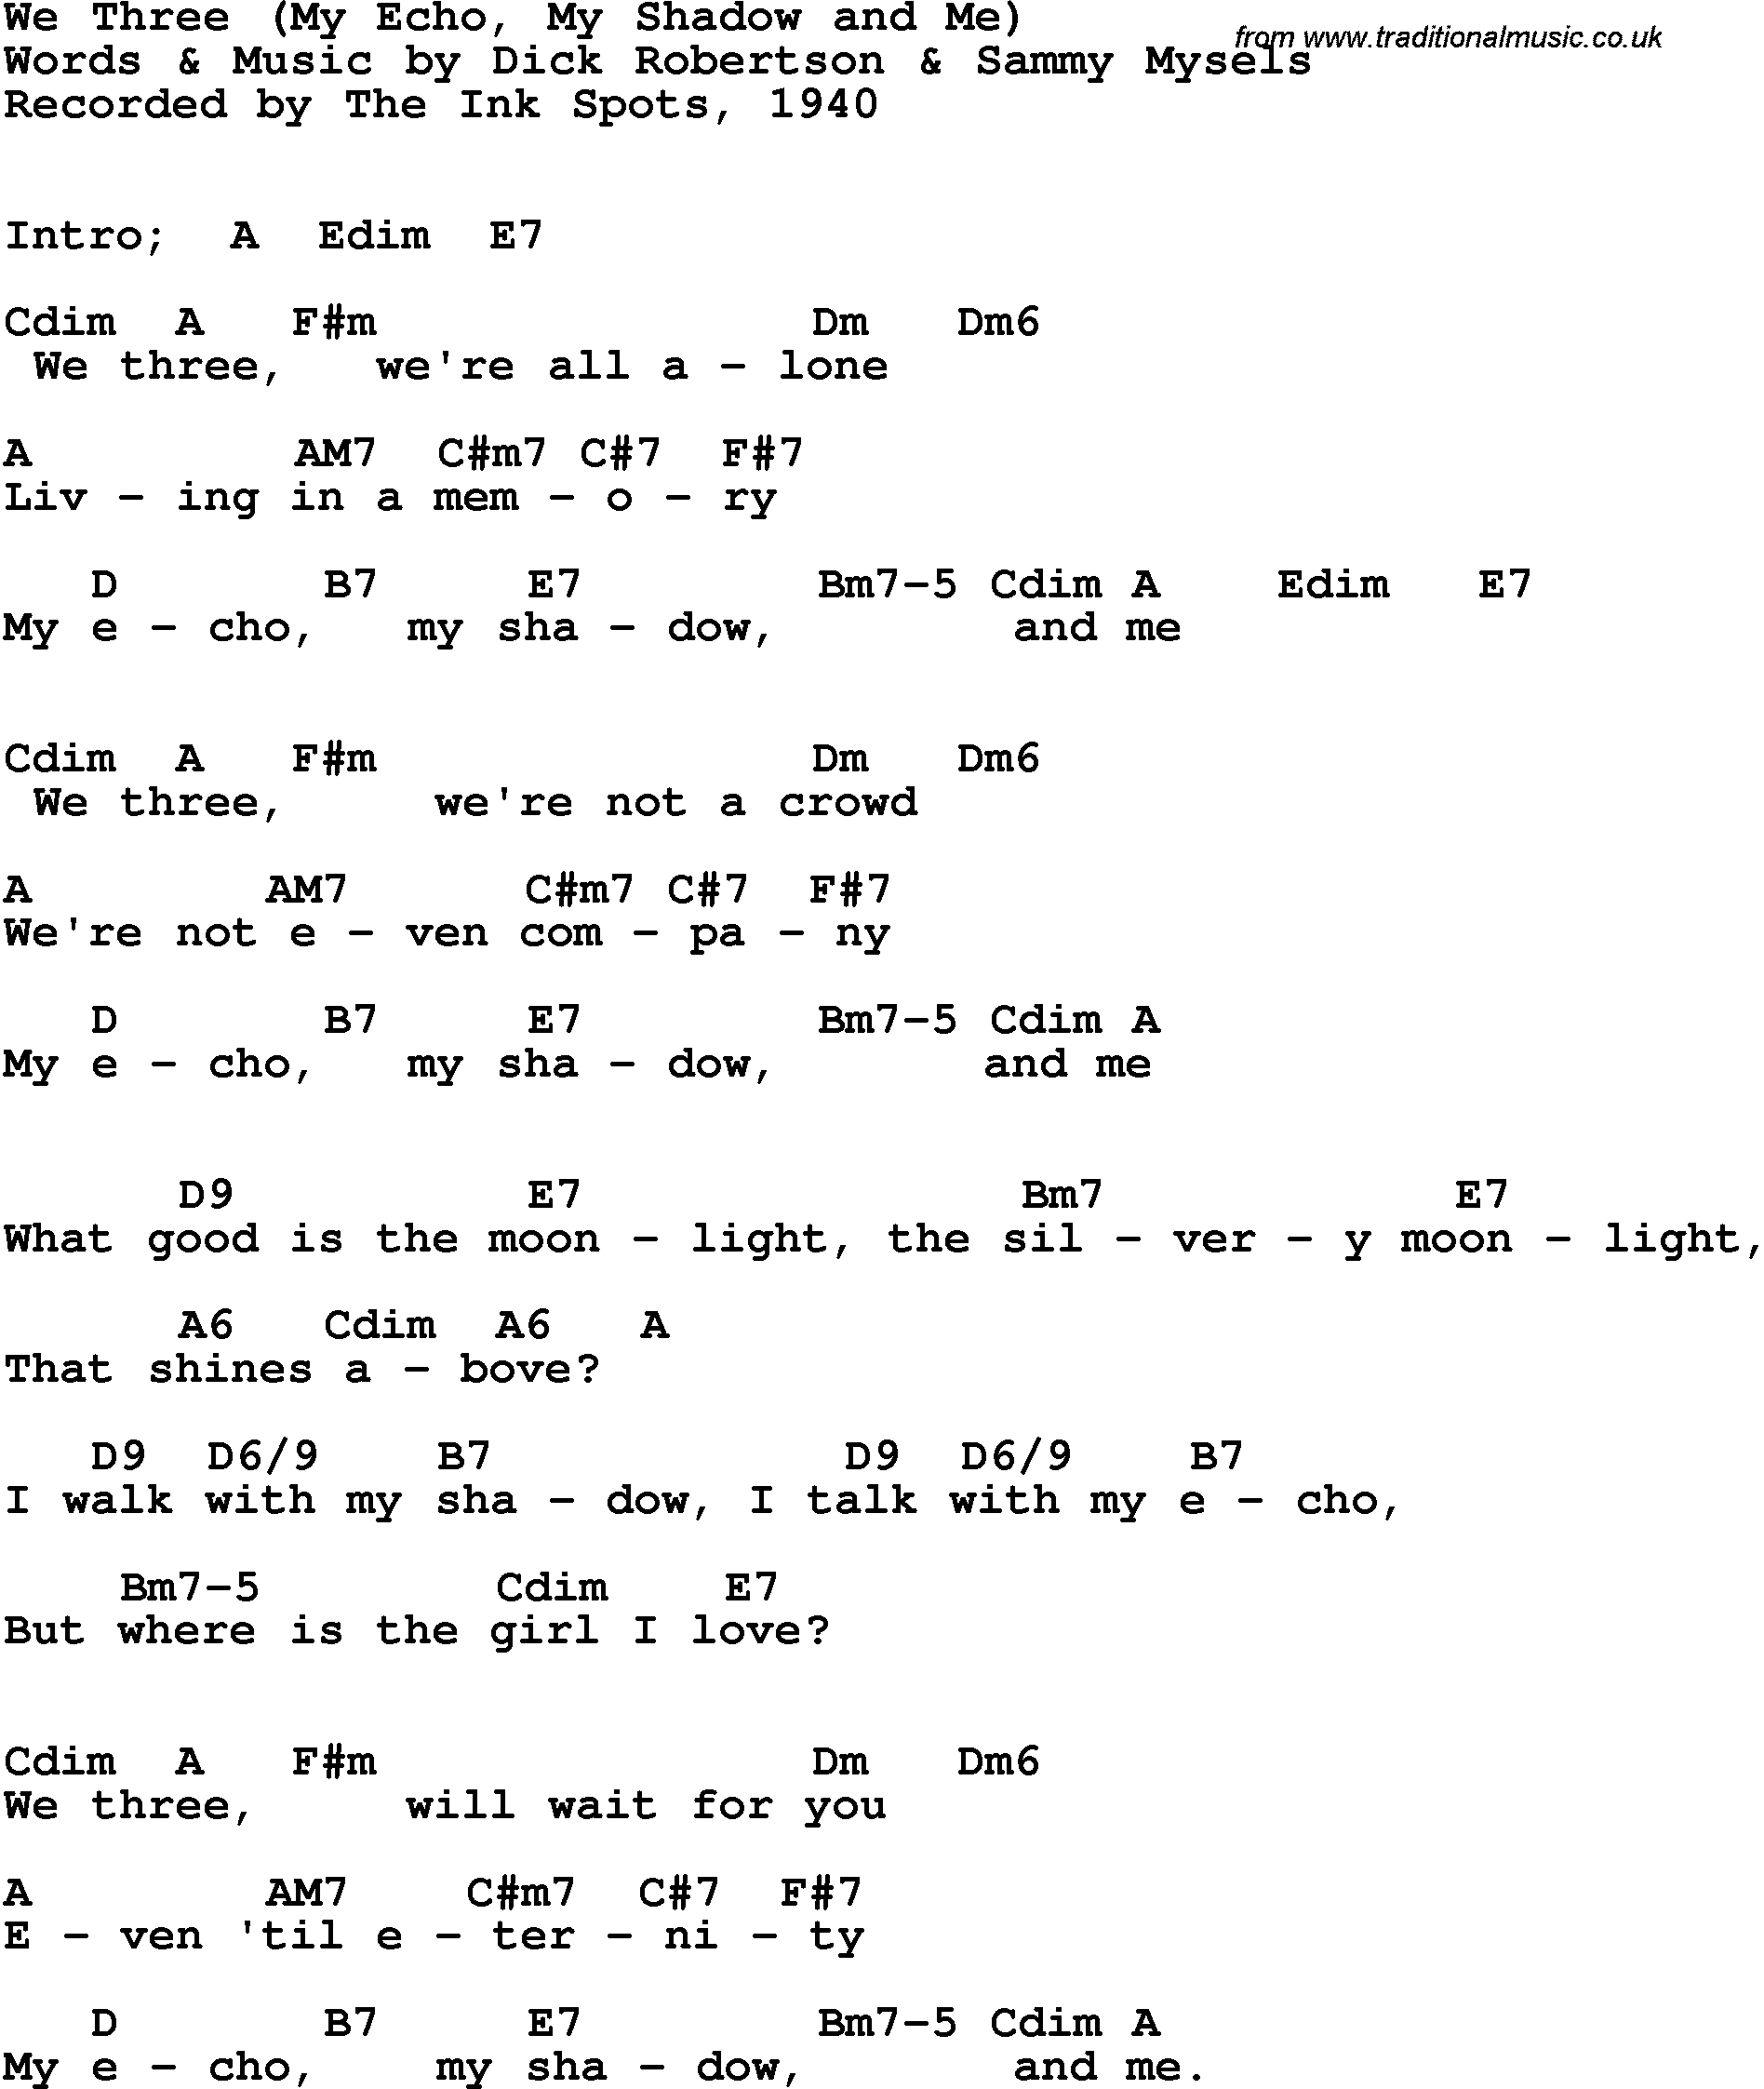 Song Lyrics with guitar chords for We Three (My Echo, My Shadow And Me) - The Ink Spots, 1940